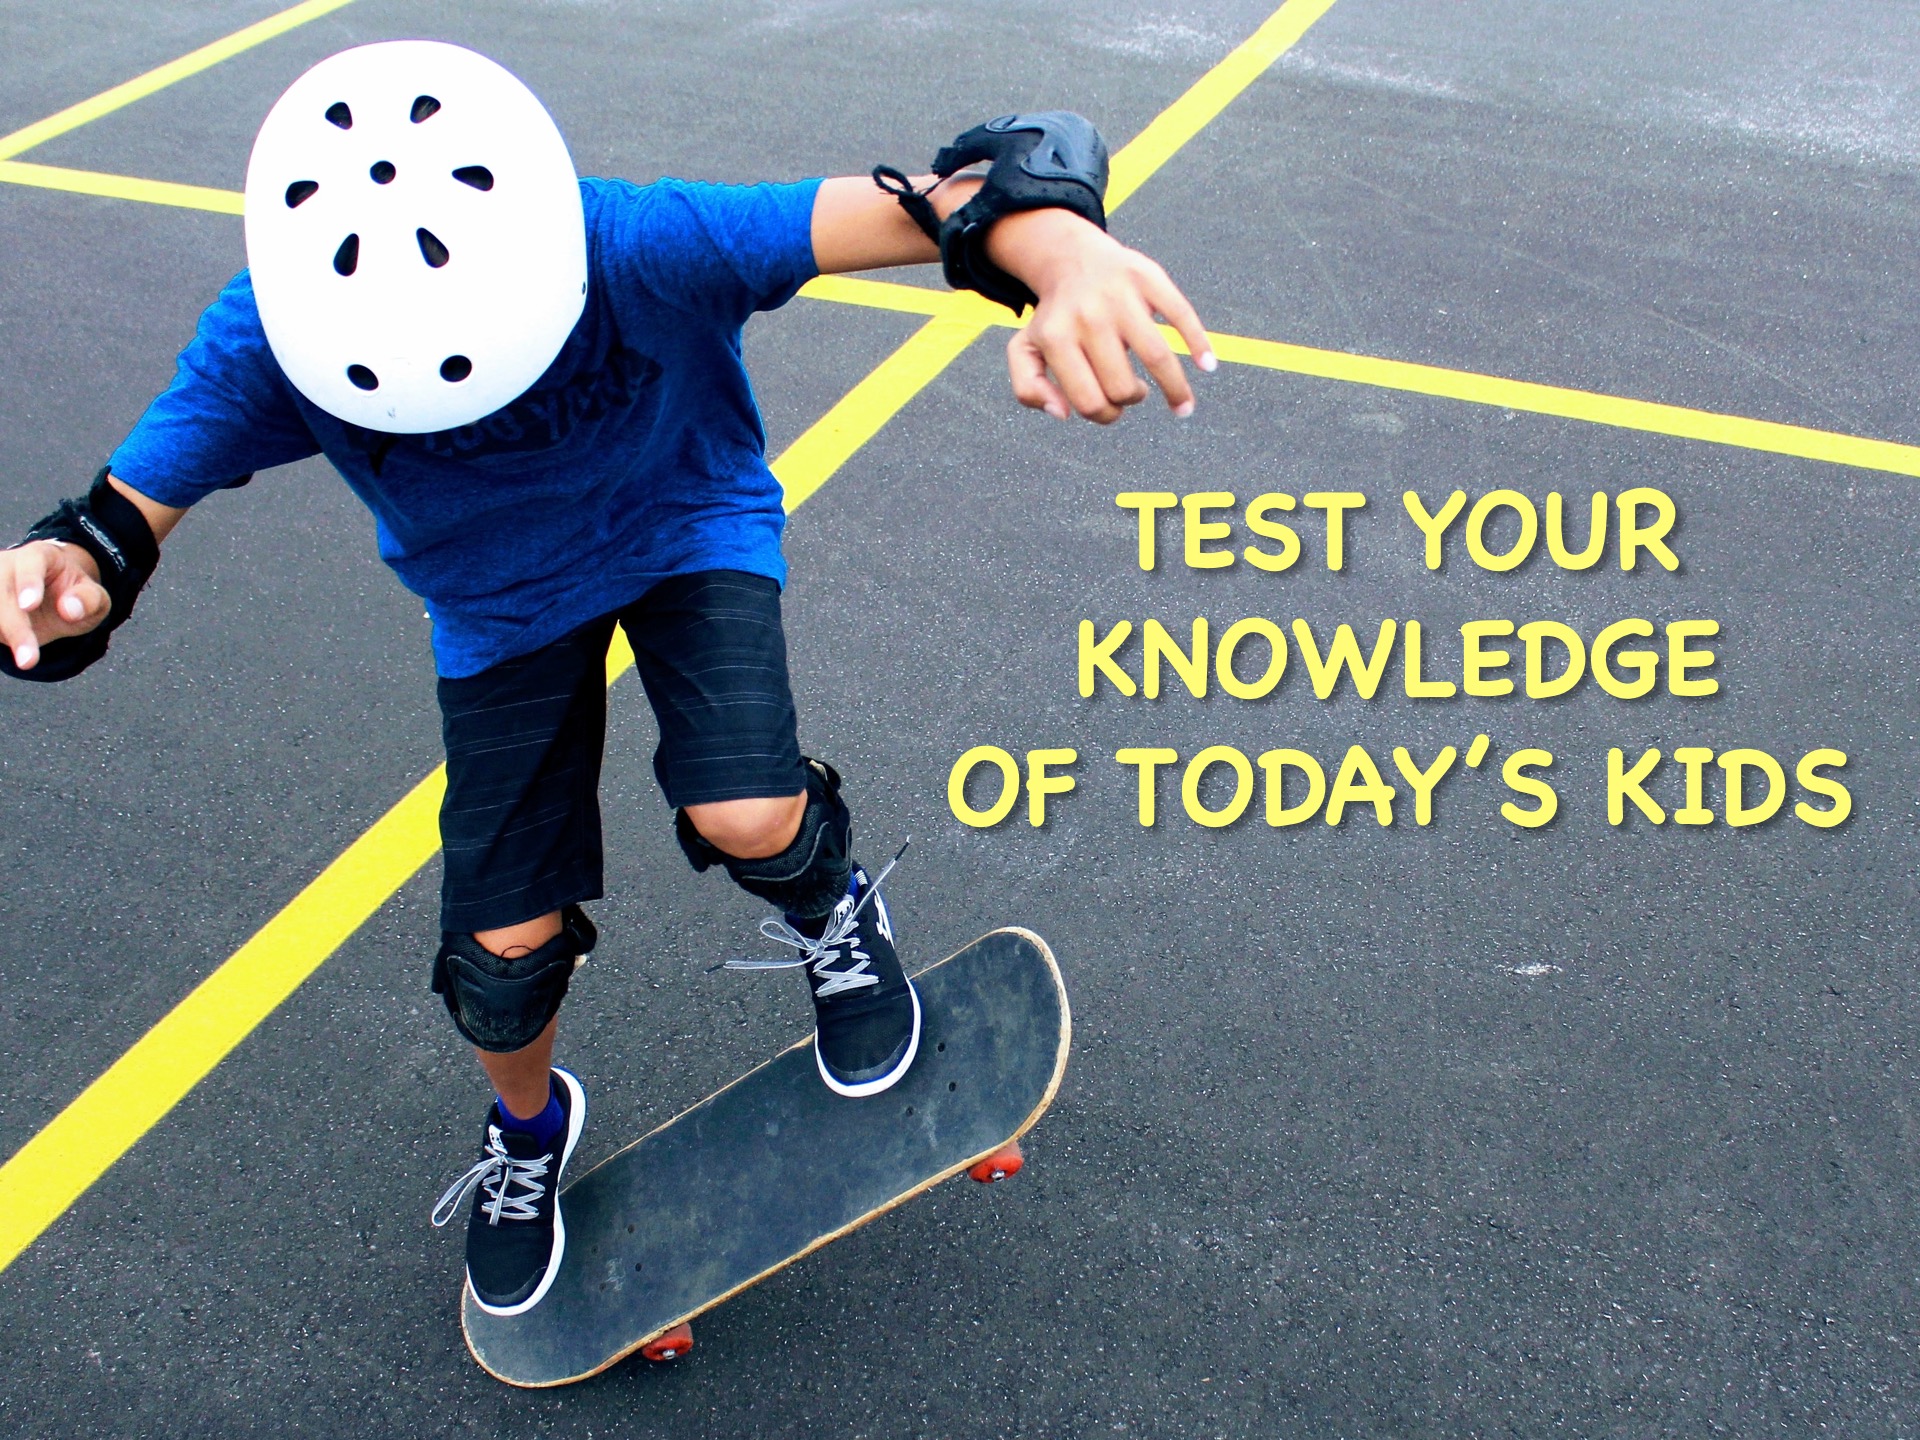 Test Your Knowledge of Today's Kids - SMART KIDS